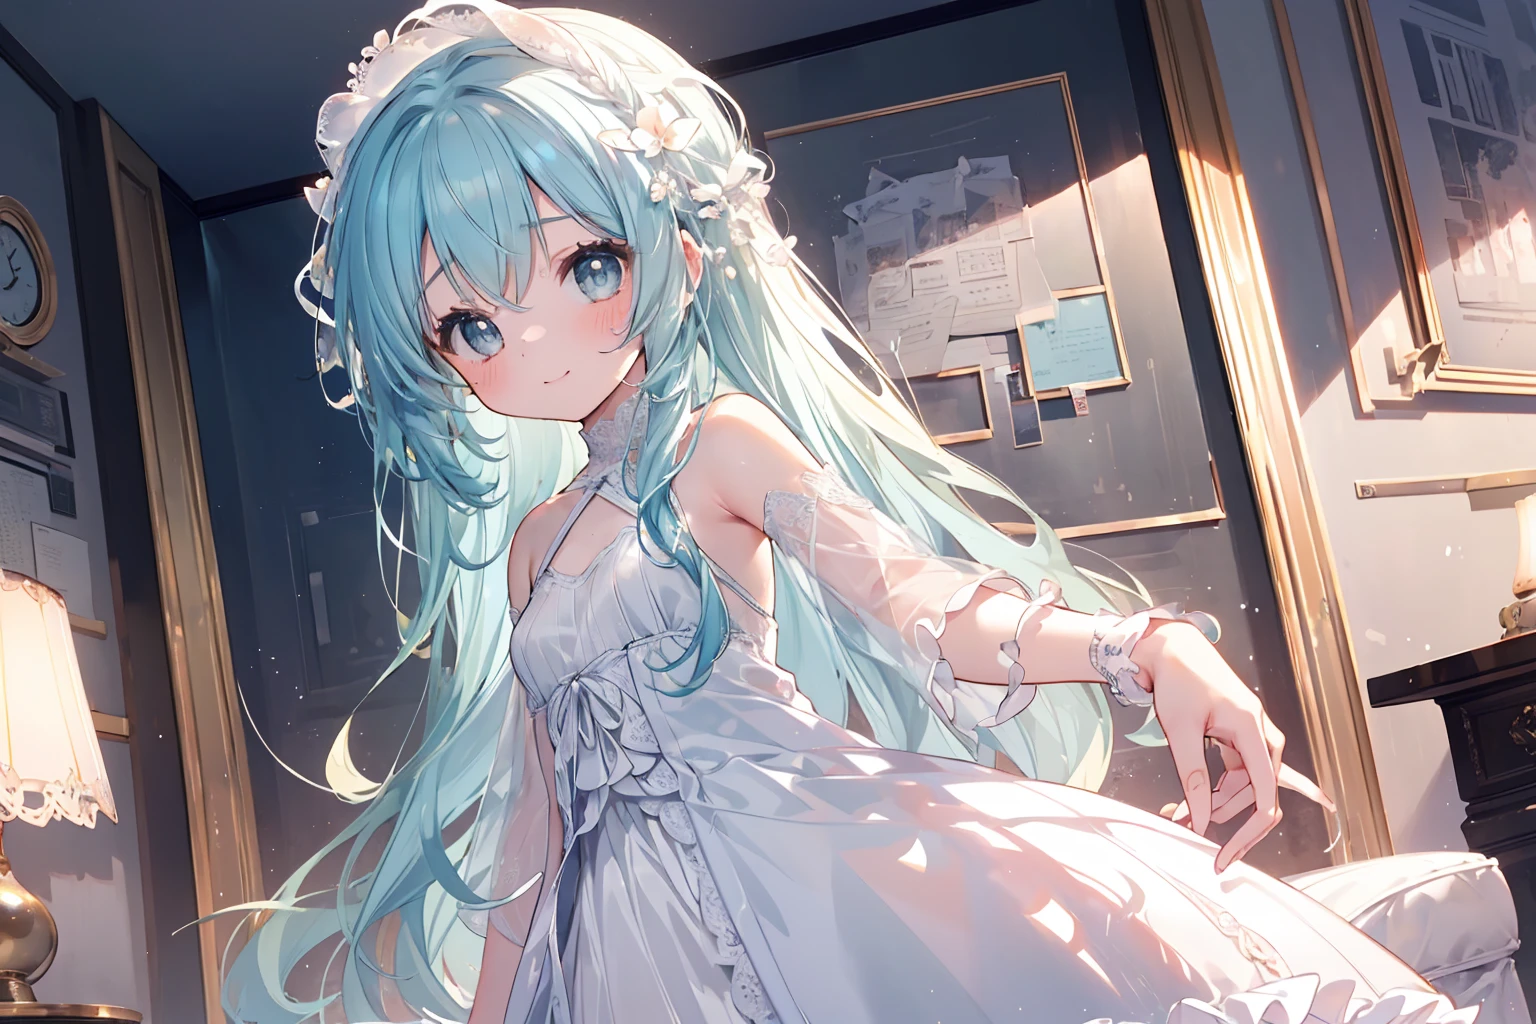 masterpiece, best quality, extremely detailed, (illustration, official art:1.1), 1 girl ,(((( light blue long hair)))), light blue hair, ,10 years old, long hair ((blush)) , cute face, big eyes, masterpiece, best quality,(((((a very delicate and beautiful girl))))),Amazing,beautiful detailed eyes,blunt bangs((((little delicate girl)))),tareme(true beautiful:1.2), sense of depth,dynamic angle,affectionate smile, (true beautiful:1.2),,(tiny 1girl model:1.2),(flat chest)), Soft Focus ,((ultra-detailliert:1.2))、(The best lighting、Best Shadows、extremely delicate and beautiful)、(the Extremely Detailed CG Unity 8K Wallpapers、​masterpiece、best qualtiy、ultra-detailliert)、(The best lighting、Best Shadows、extremely delicate and beautiful)、(the perfect body:1.5)、Best Quality, (Illustration:1.2), (Ultra-detailed), hyperdetails, (delicate detailed), (Intricate details), (Cinematic Light, best quality backlight), Perfect body, ( extremely delicate and beautiful), Cinematic Light、【emblem:Irridescent color 】、Sunnyday、happy smile, ((Best Quality)), (Masterpiece: 1.2), (Delicate Beautiful Girl), Illustration, 1 girl, white shirt, skirt, looking at the audience, room, sofa, red wine,